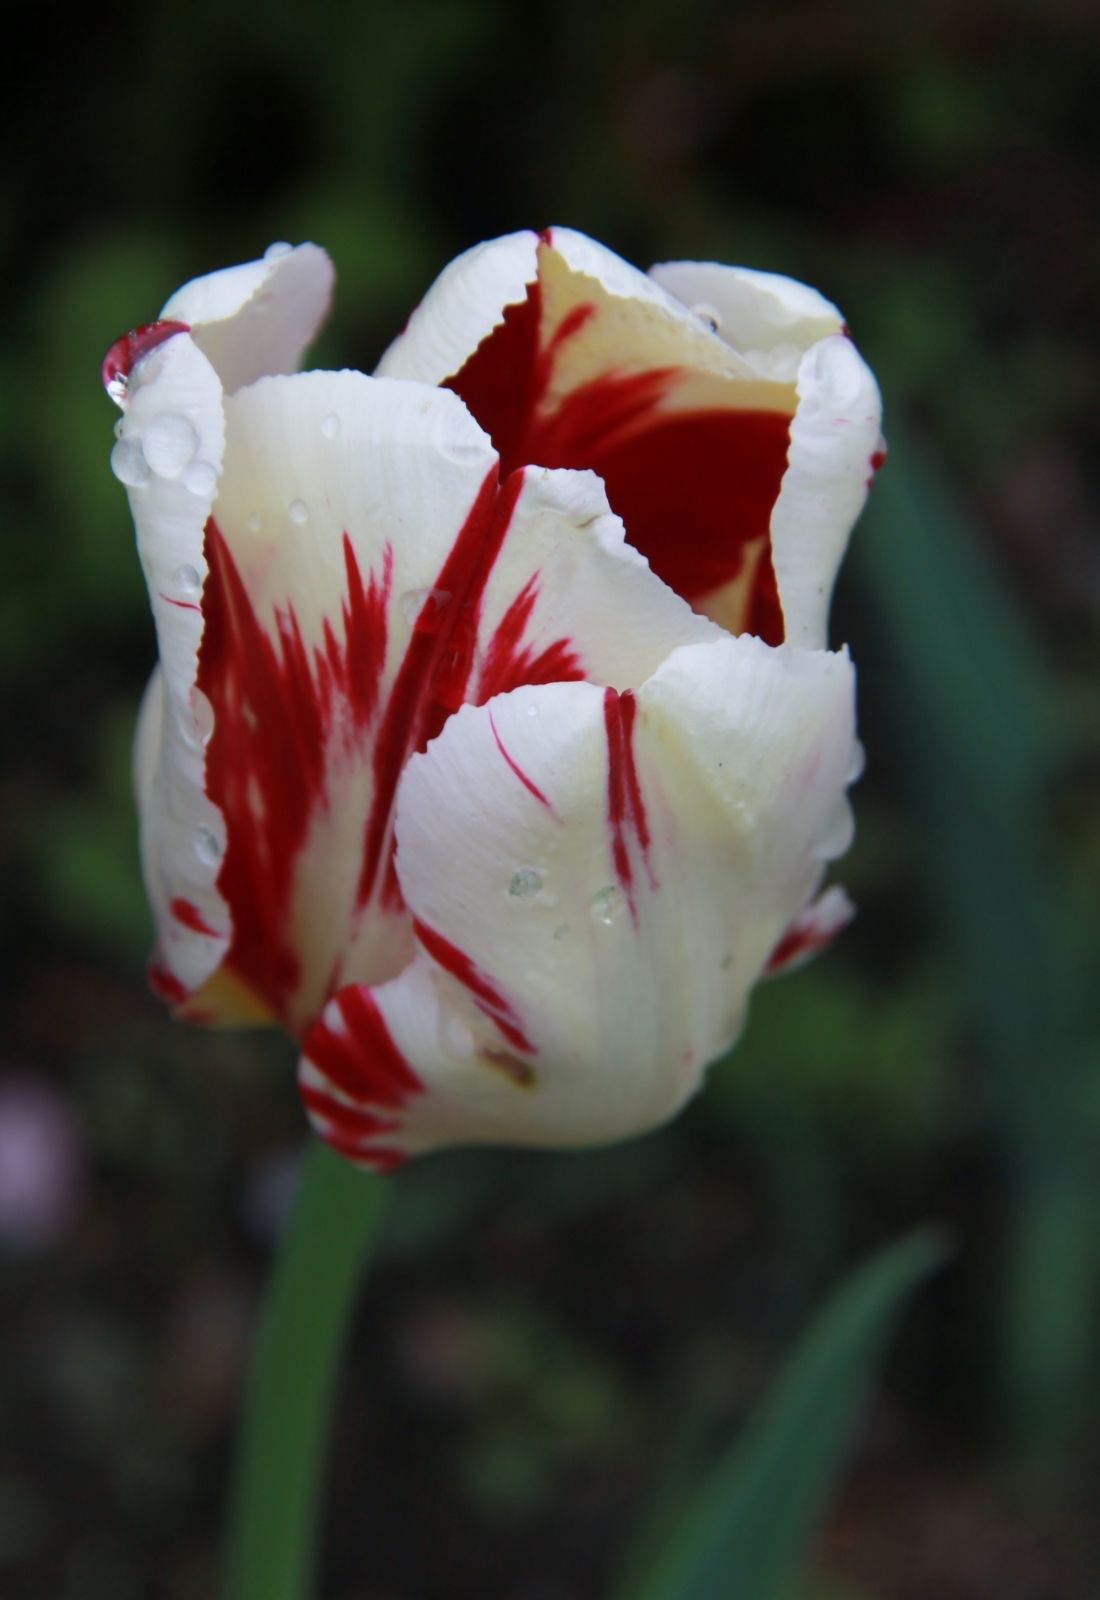 Raindrops on a Red and White Tulip